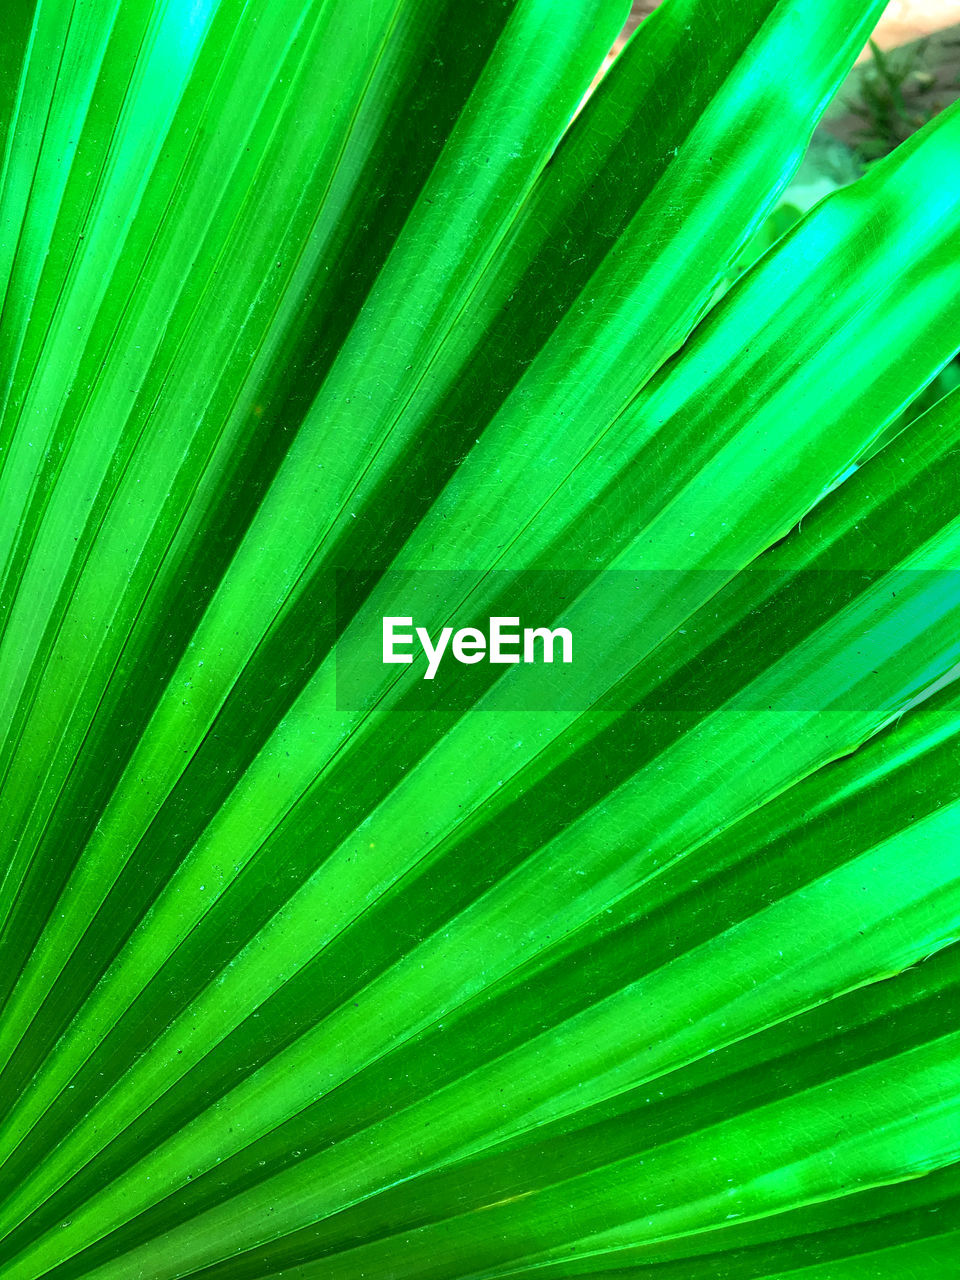 CLOSE-UP OF PALM LEAVES